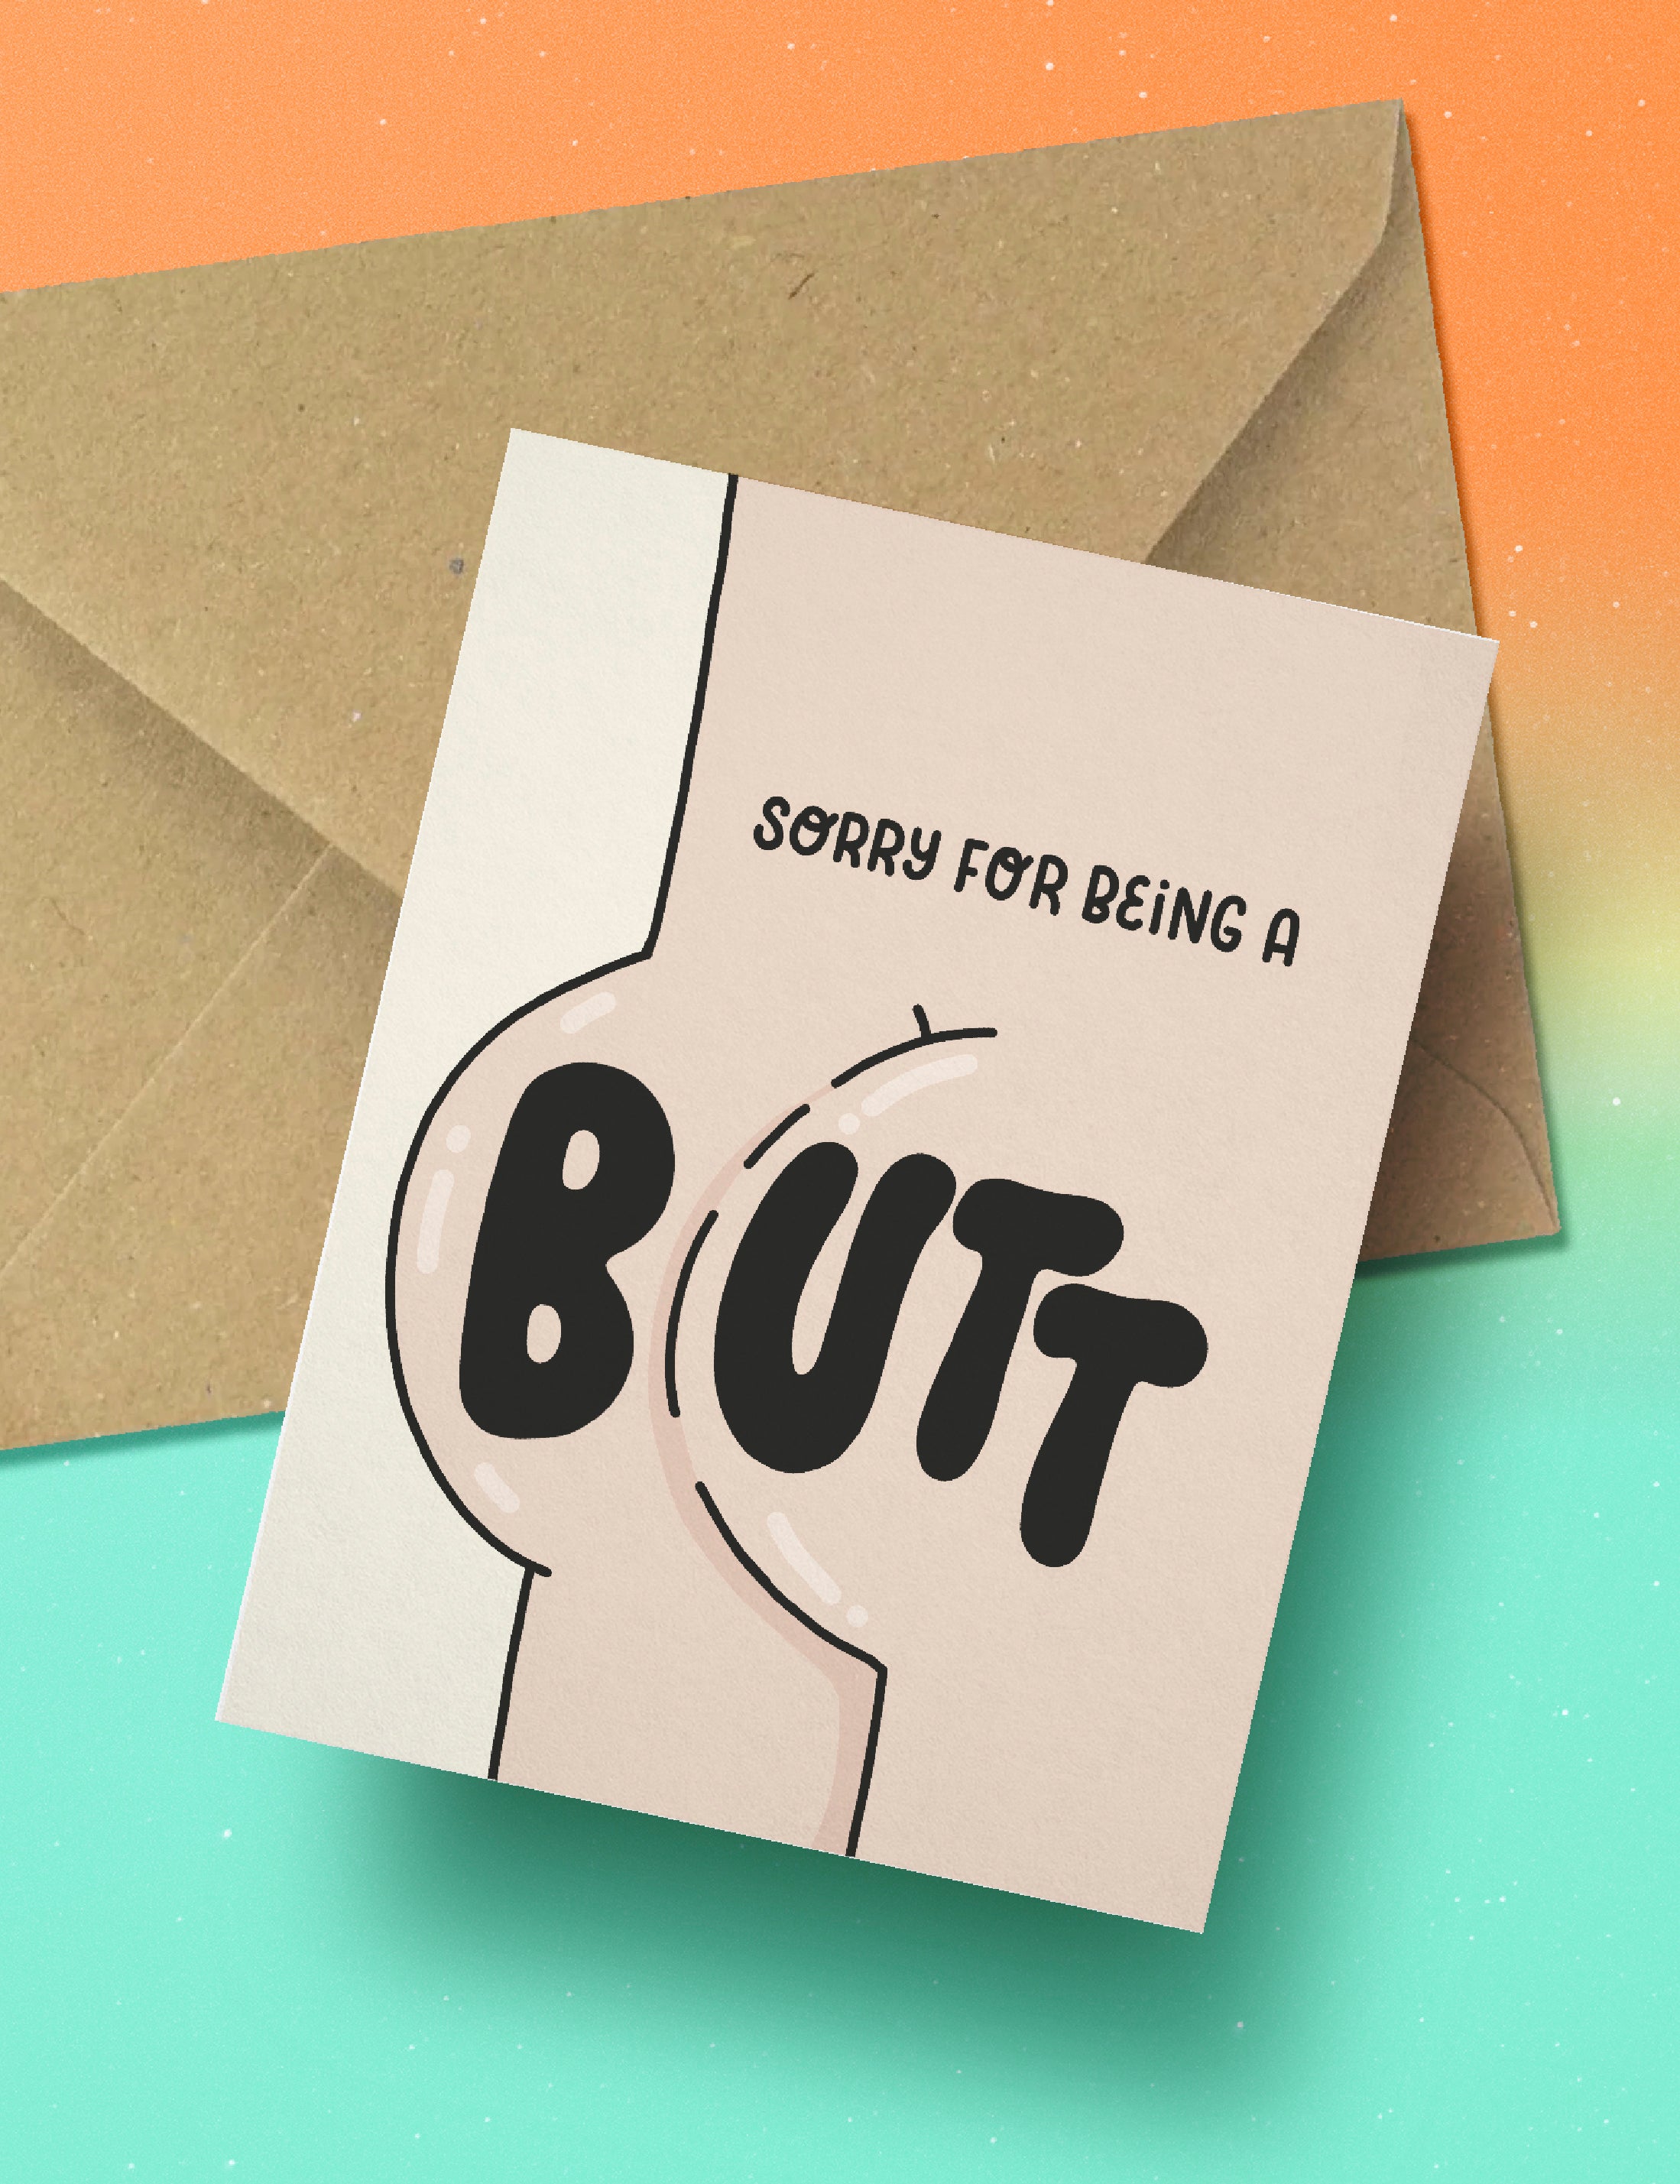 Sorry for being a butt card